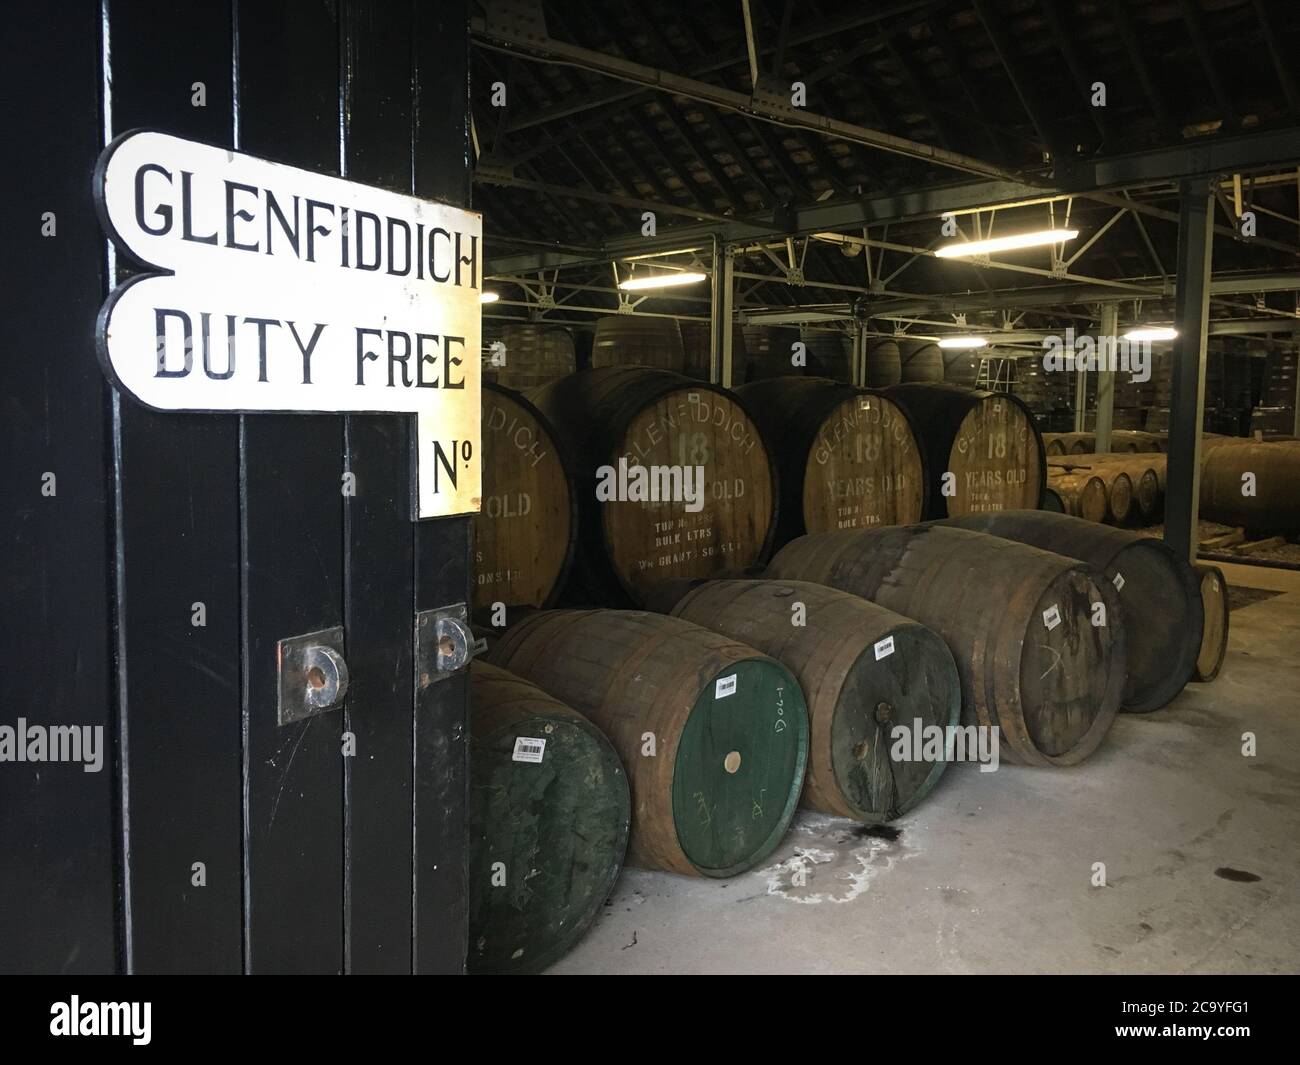 Glenfiddich single malt whisky distillery, in Speyside whisky country, in Dufftown, Scotland, on 27 July 2020. Stock Photo